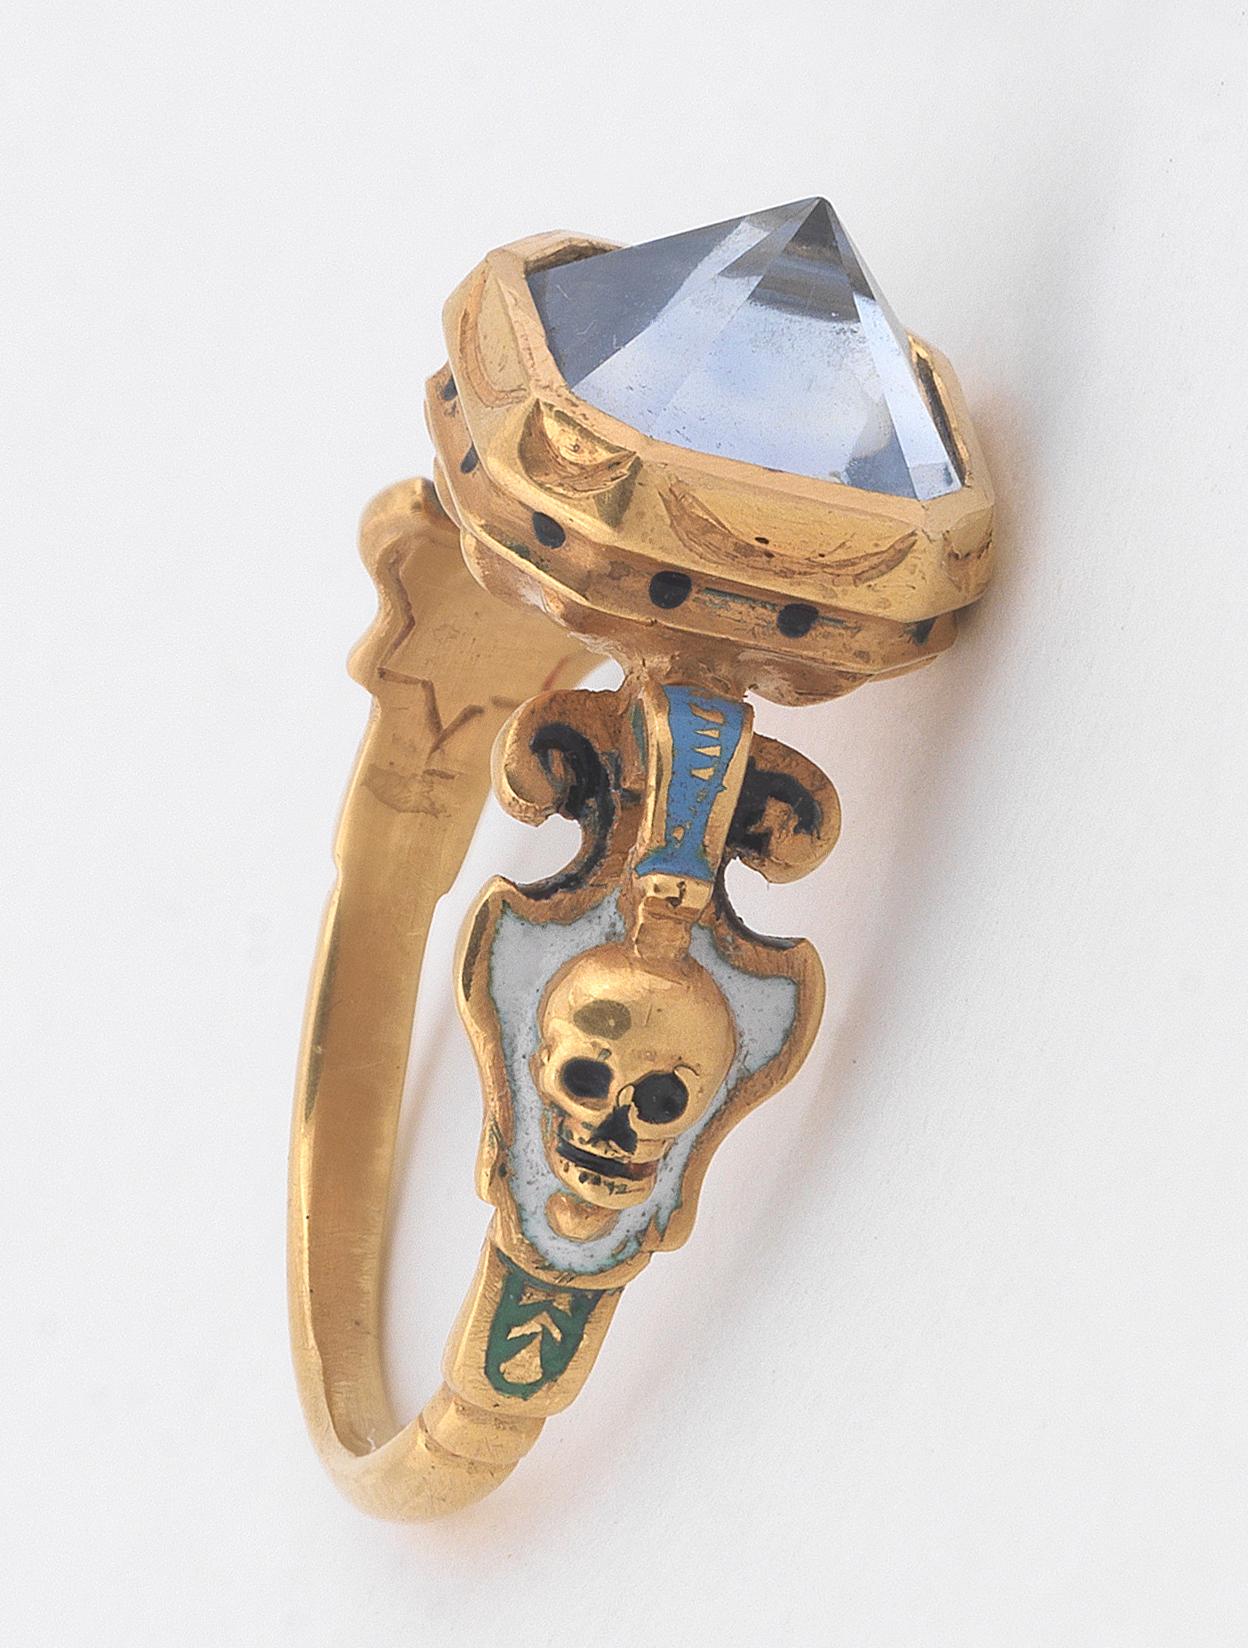 Closed-set point-cut sapphire,with enamel skull on the shank.
Size 8
